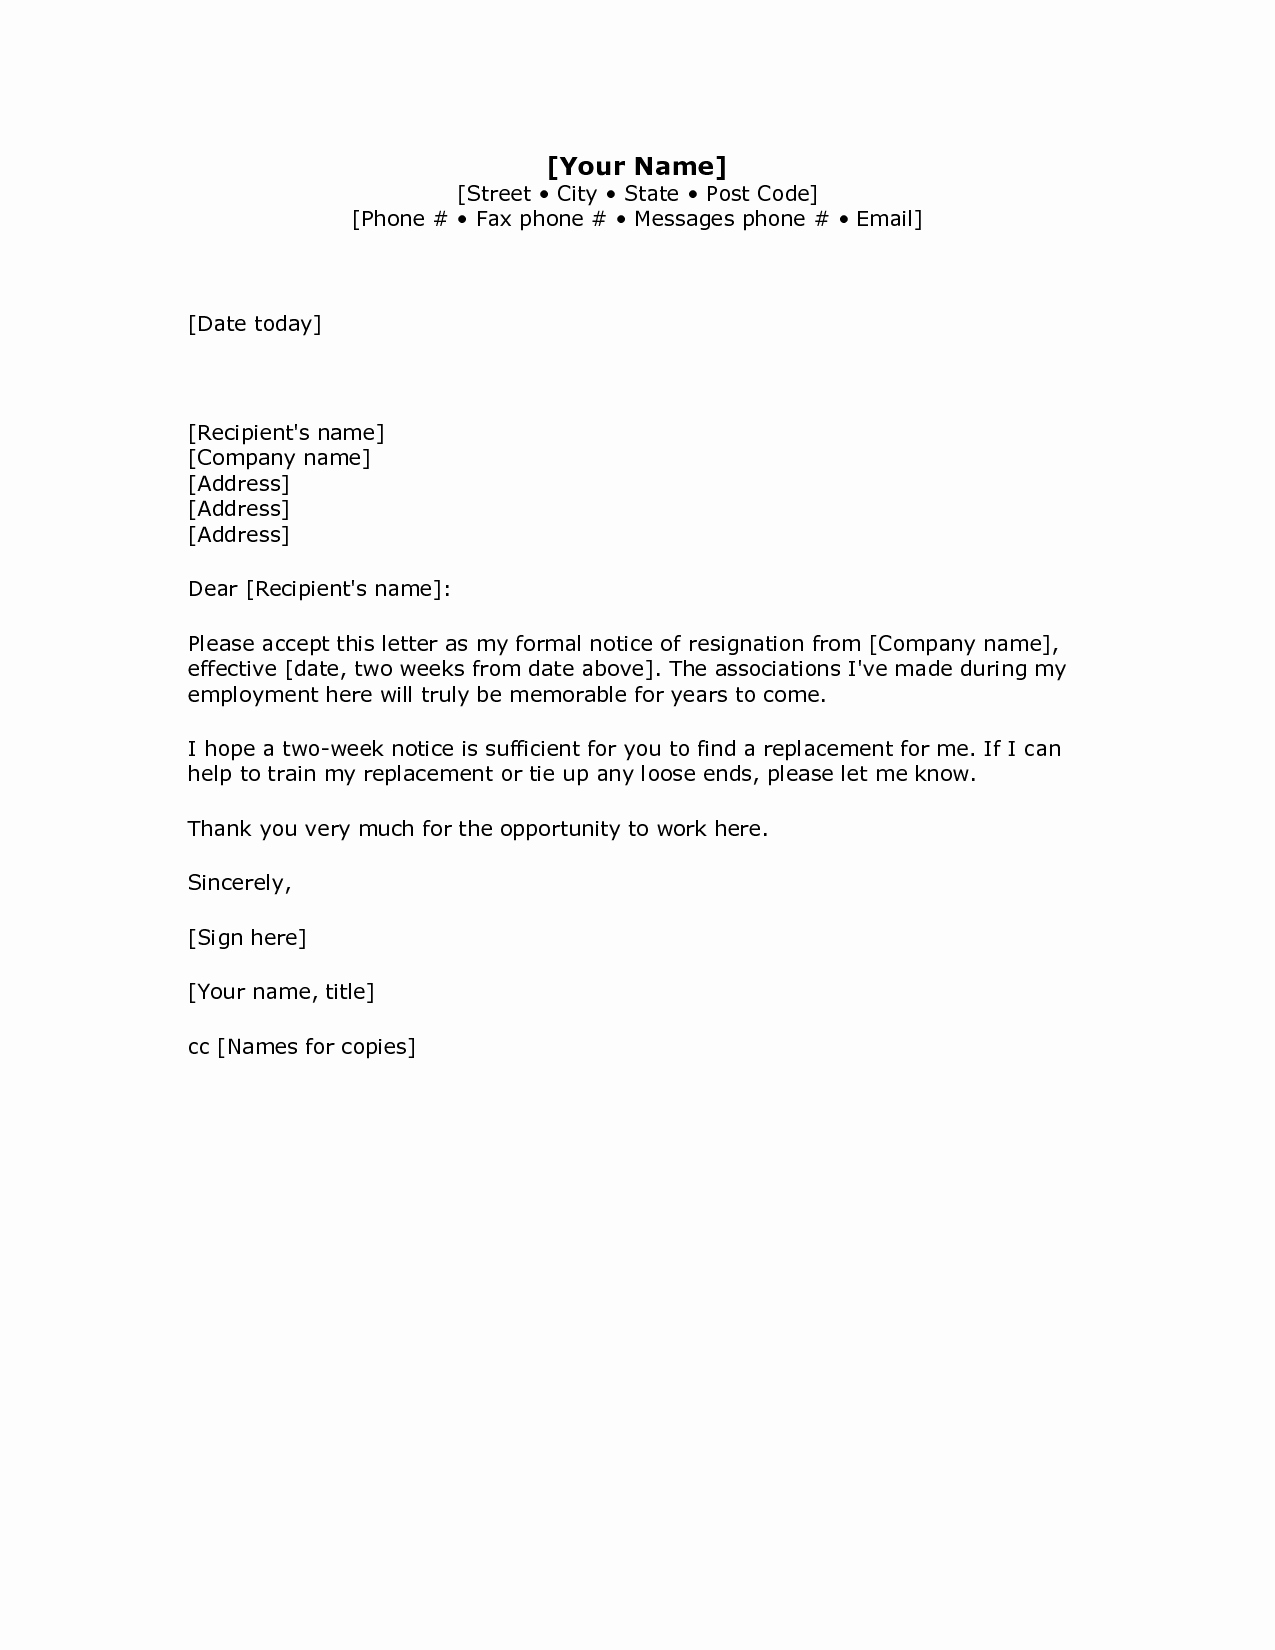 letter of resignation template word 2007 Collection-Word Resume Templates Free New 2 Weeks Notice Letter Resignation Letter Week Notice Words 1-c